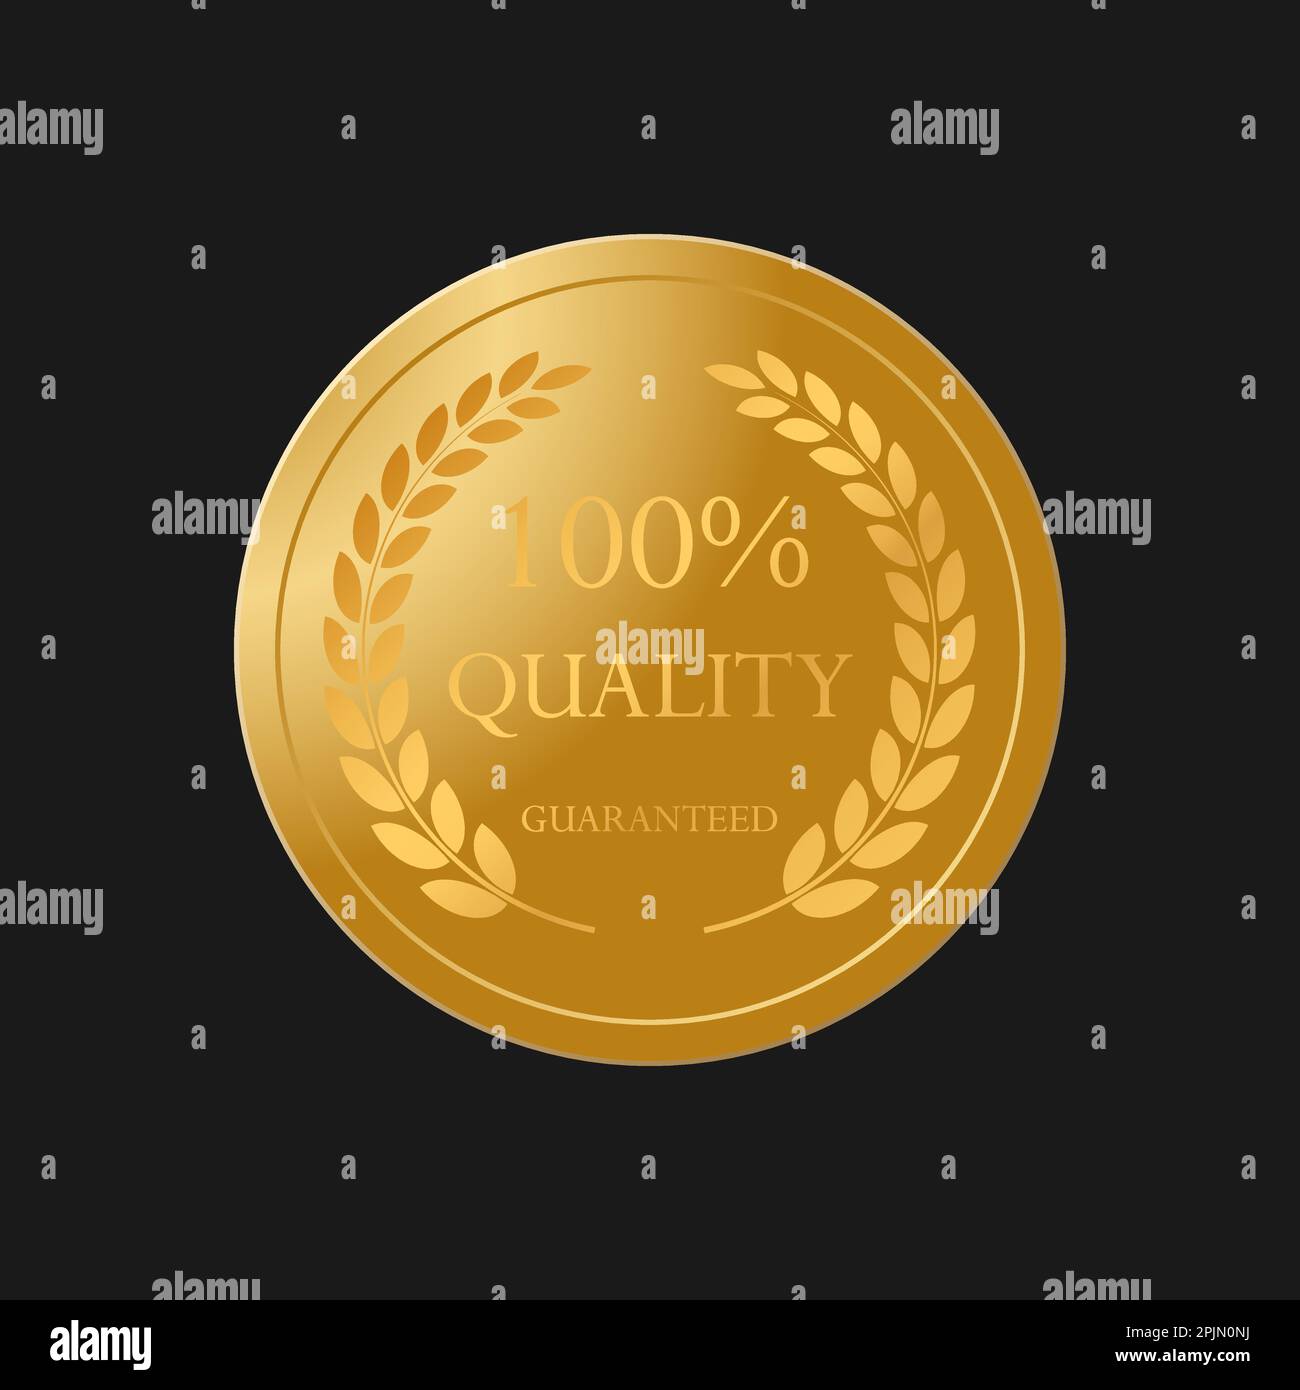 Best Deal Golden Label With Ribbon. Stock Photo